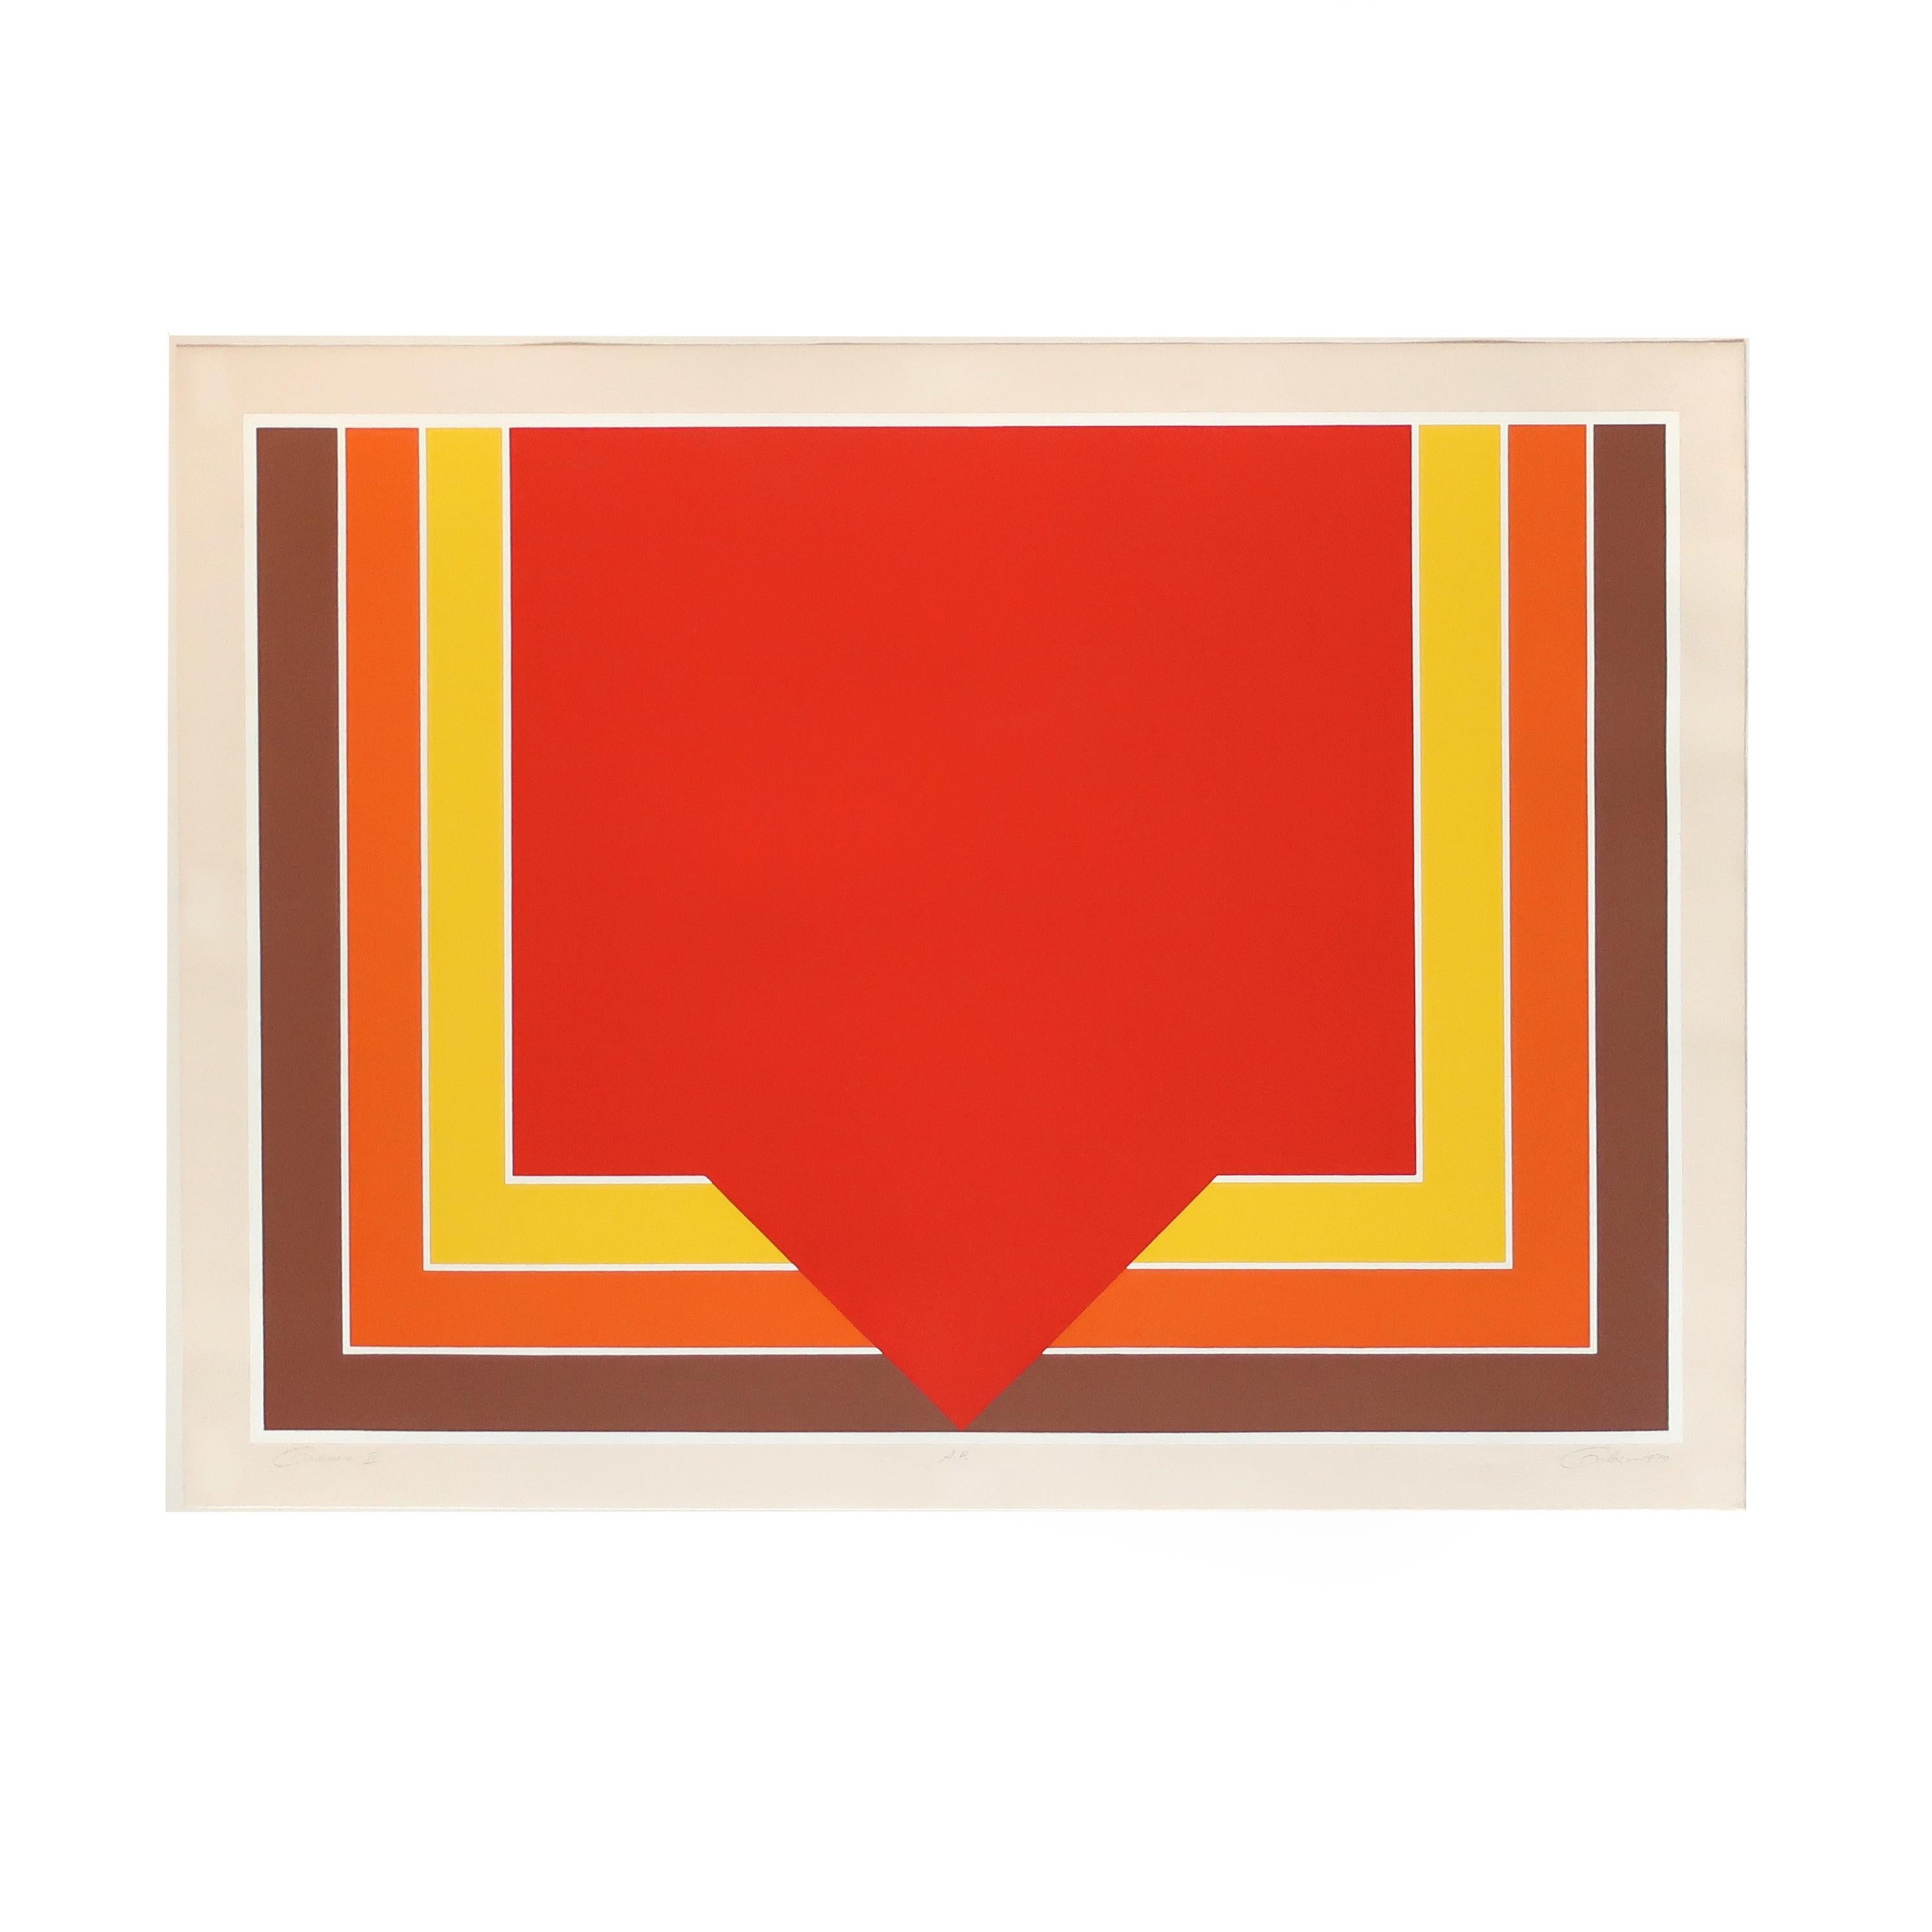 A fantastic 1970 geometric hard edge serigraph by Gibson (first name unknown) in red, orange, yellow, brown and white. In the style of Richard Anuszkiewicz, Roy Ahlgren, Sol LeWitt, Vasarely, Jurgen Peters, Michael Challenger, Marko Spalatin, Yaacov